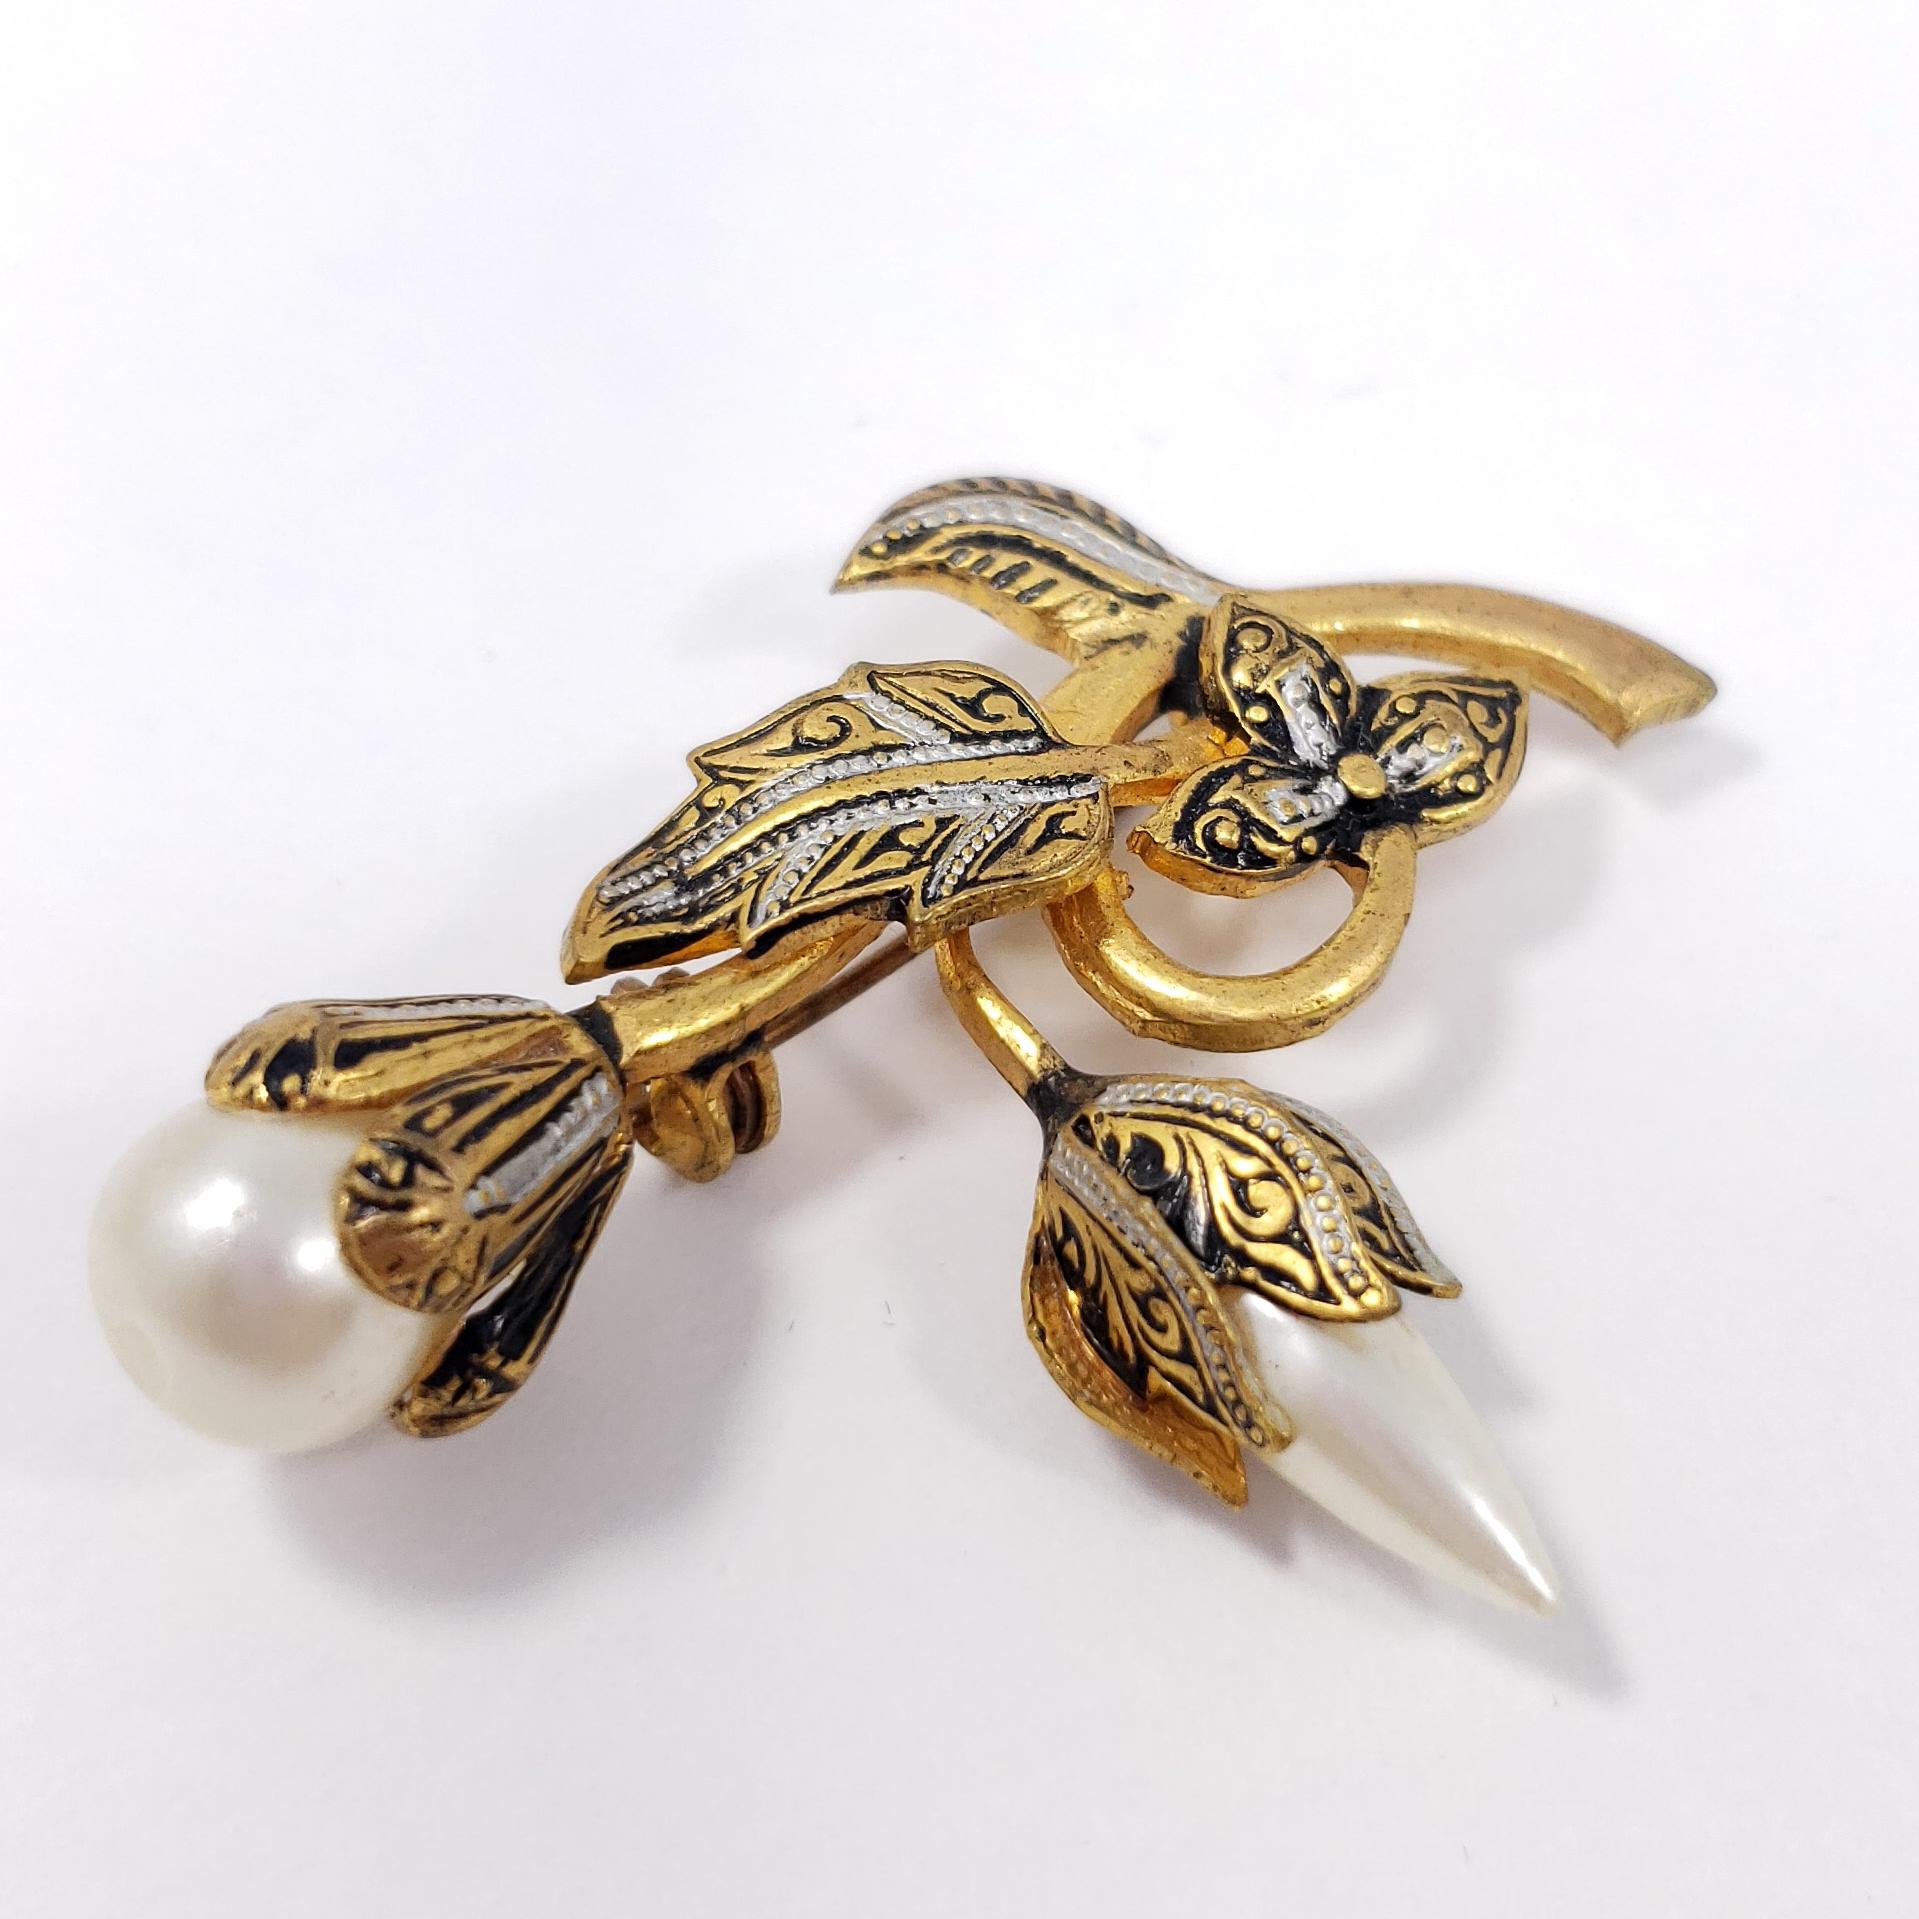 A touch of subtle elegance - this luxurious gold-plated pin brooch features two faux pearls and black enamel accents.